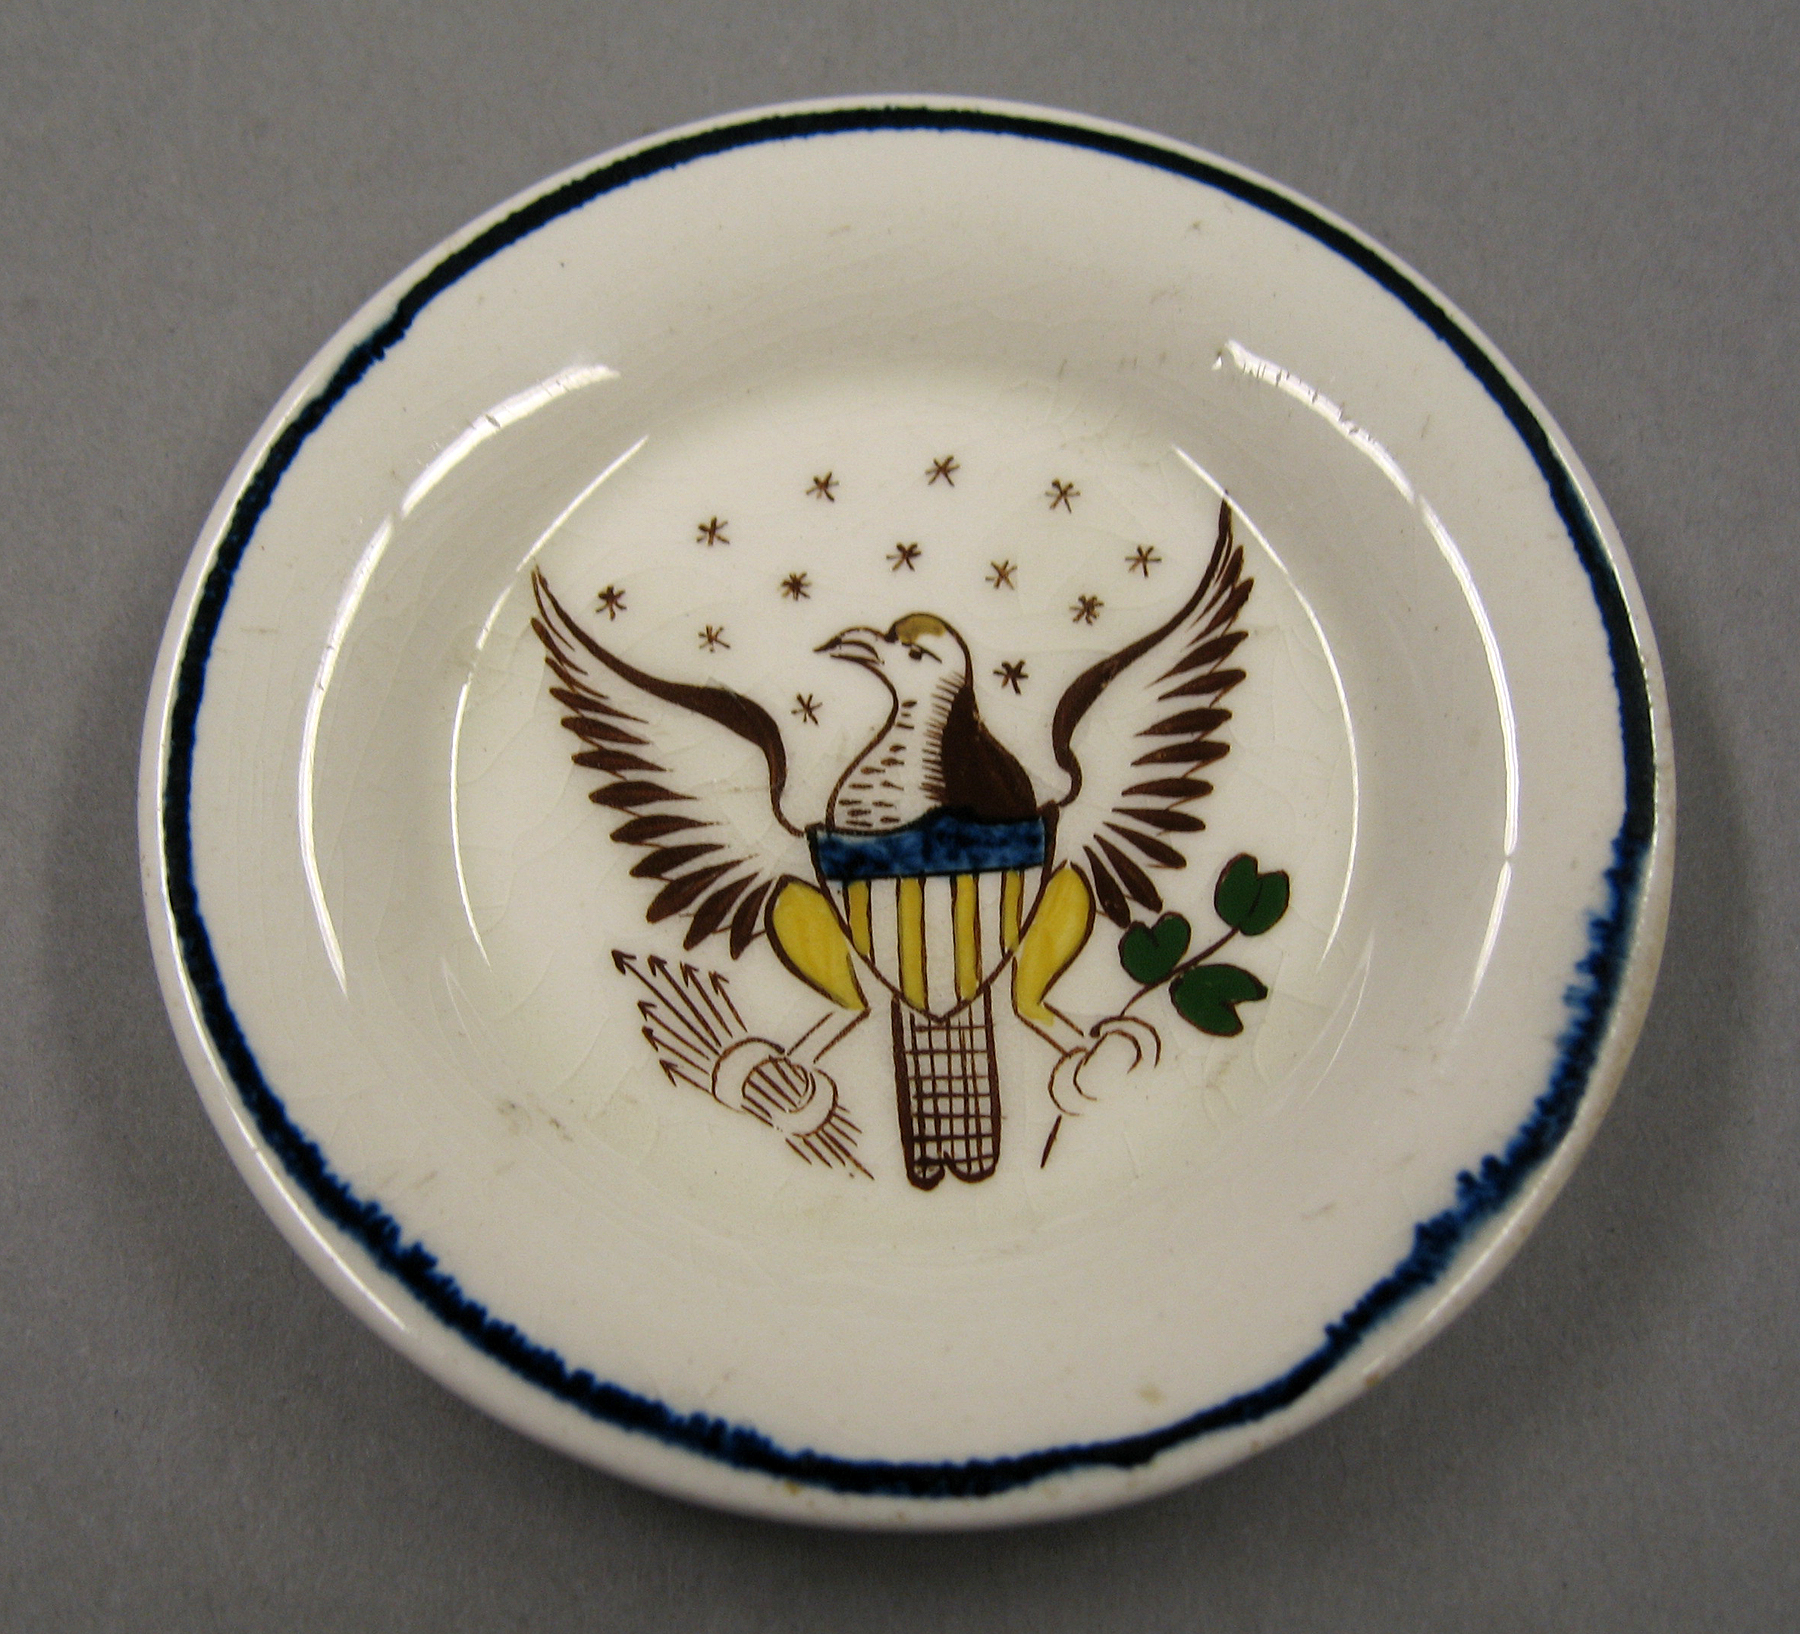 1954.0003.005 Cup plate